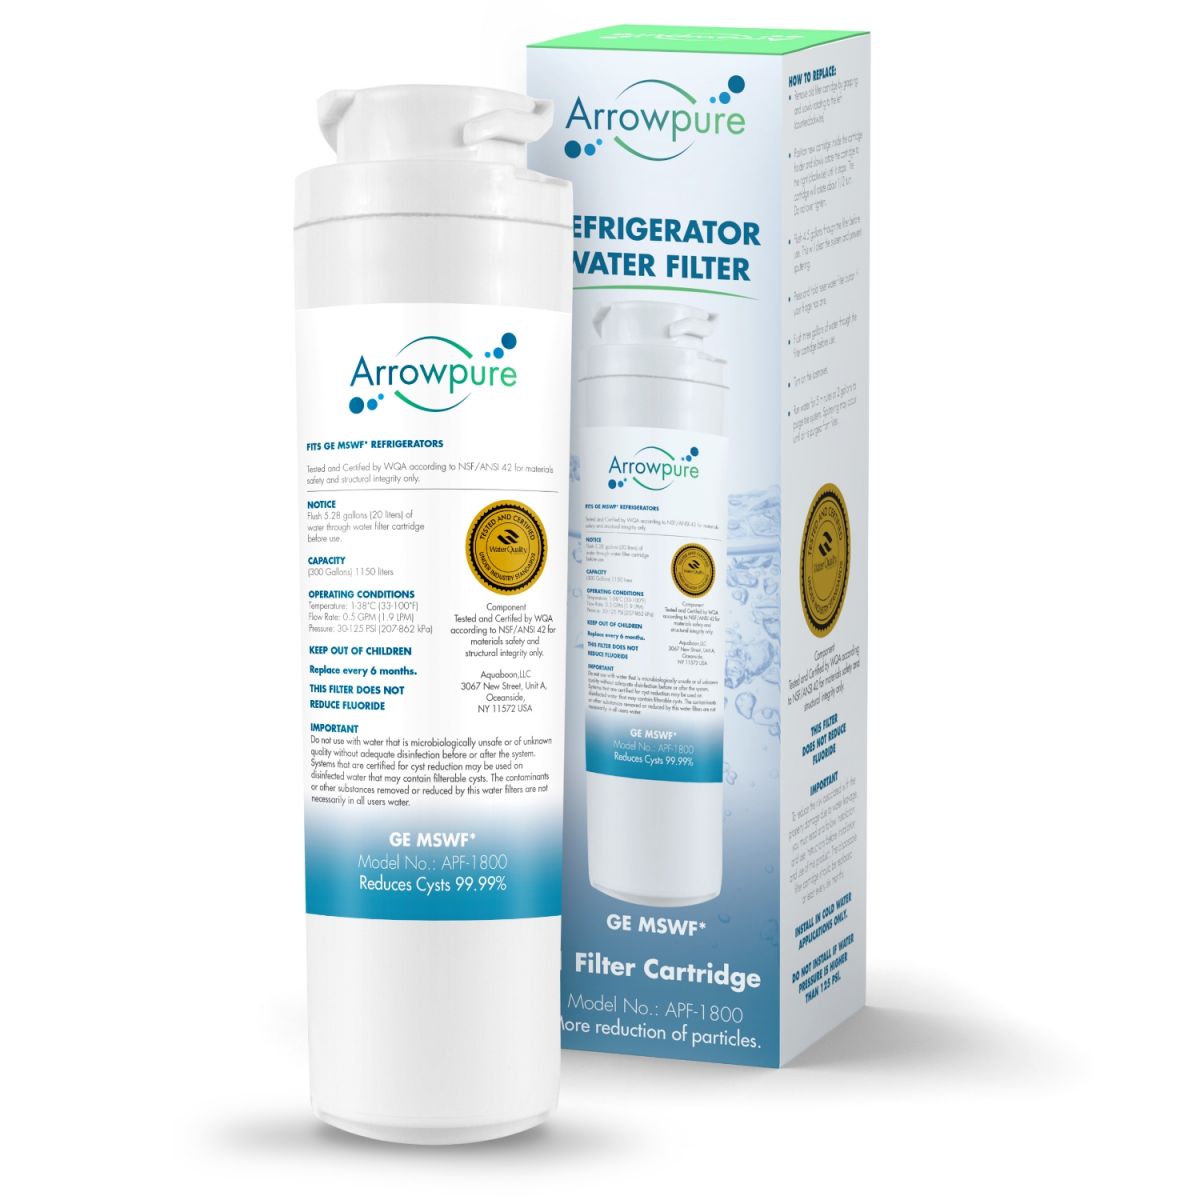 Arrowpure Refrigerator Water Filter Replacement APF-1800X1